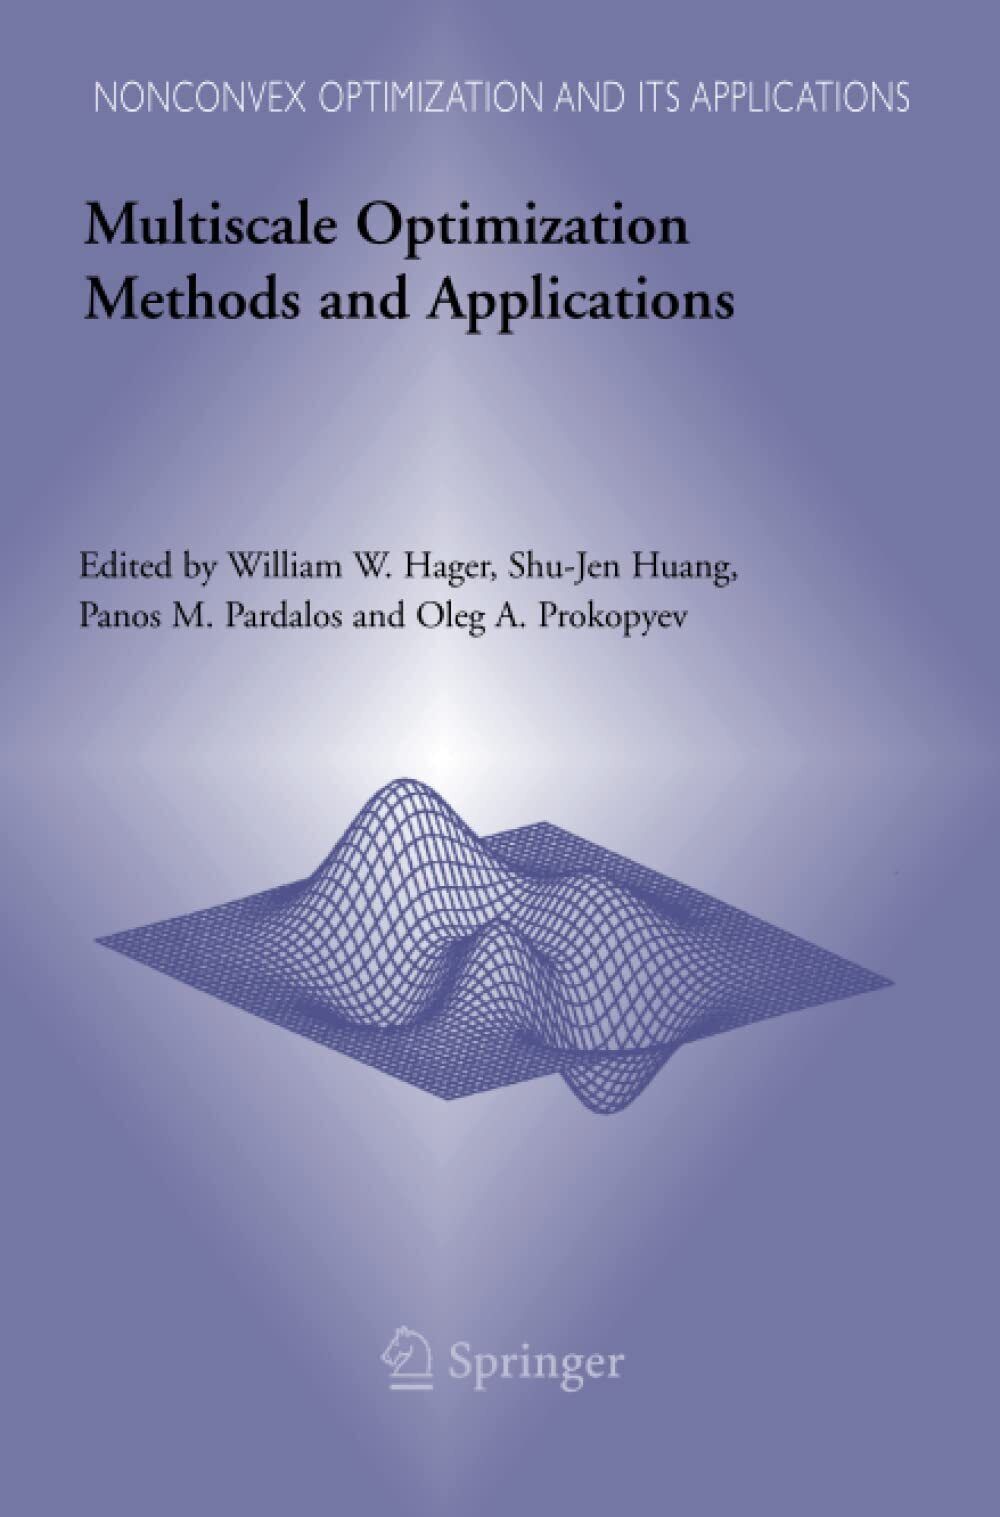 Multiscale Optimization Methods and Applications - William W. Hager - 2014